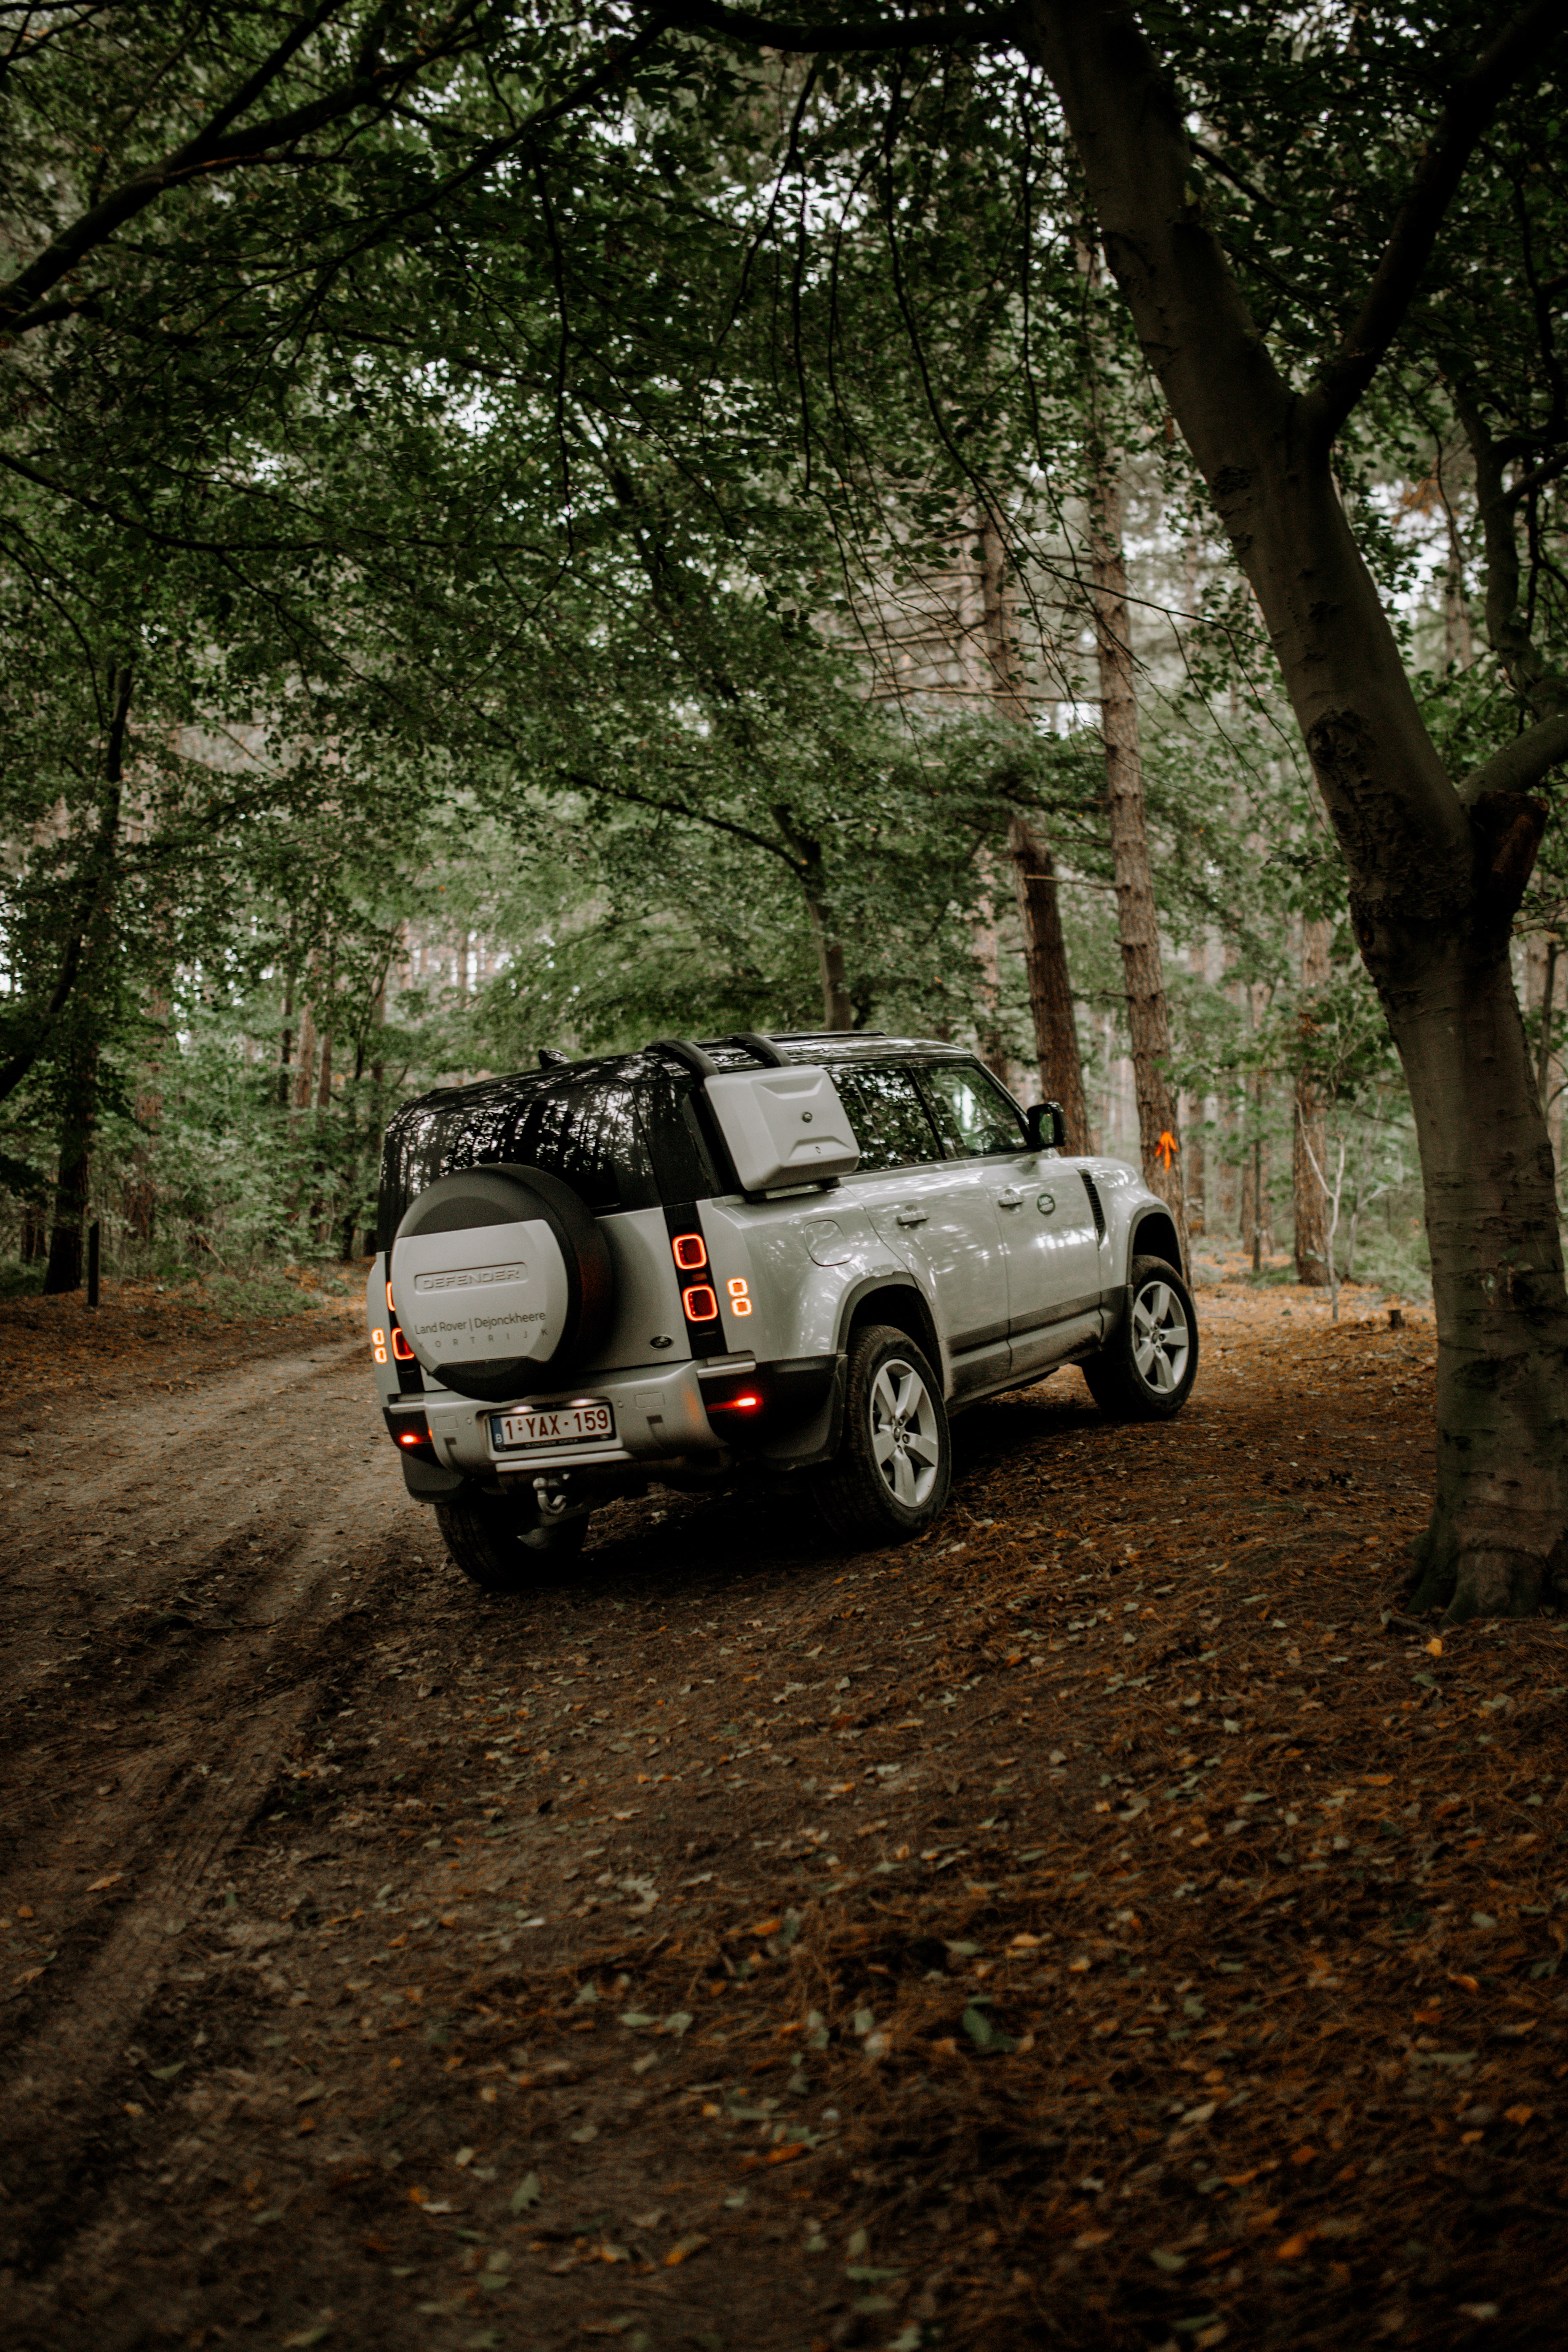 land rover, suv, rear view, cars, forest, car, back view Full HD